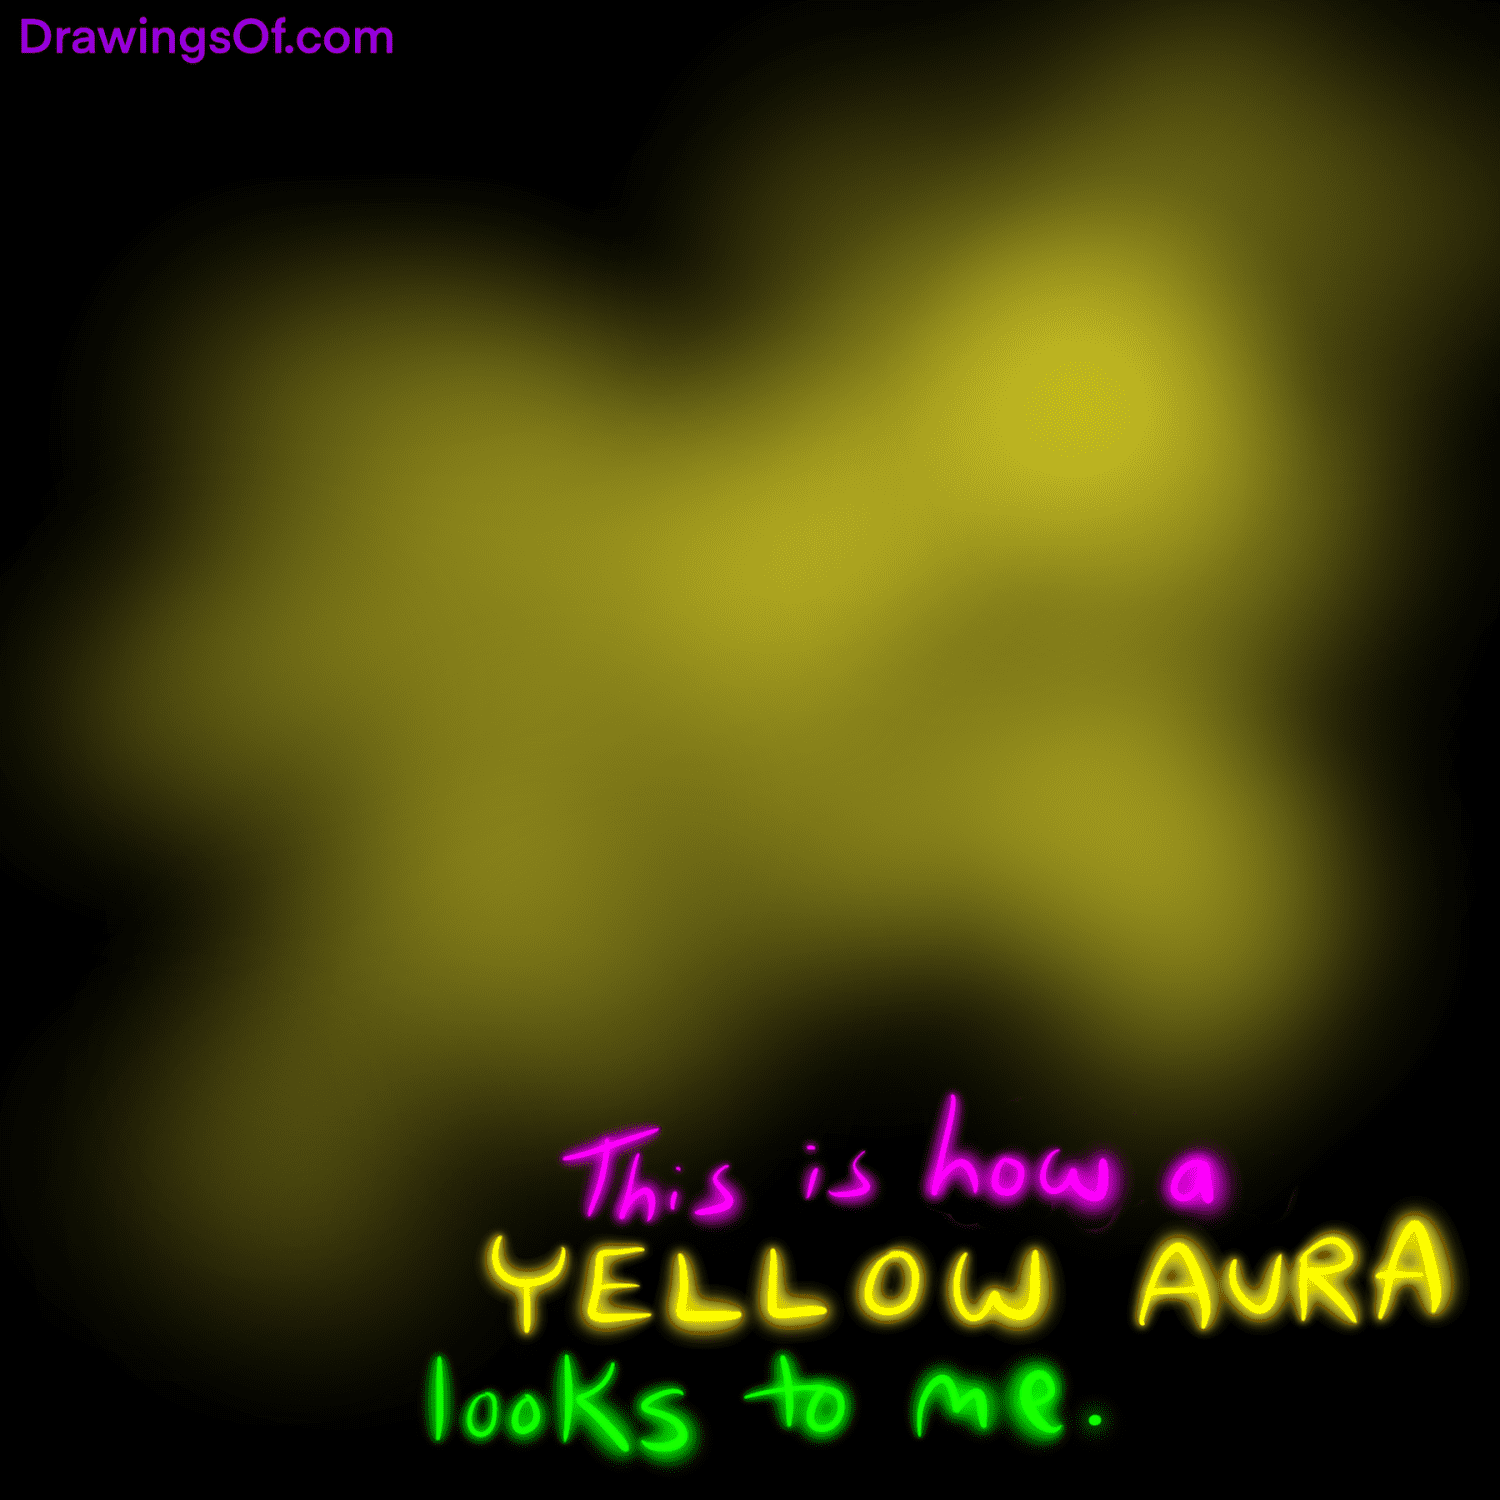 Yellow aura meaning